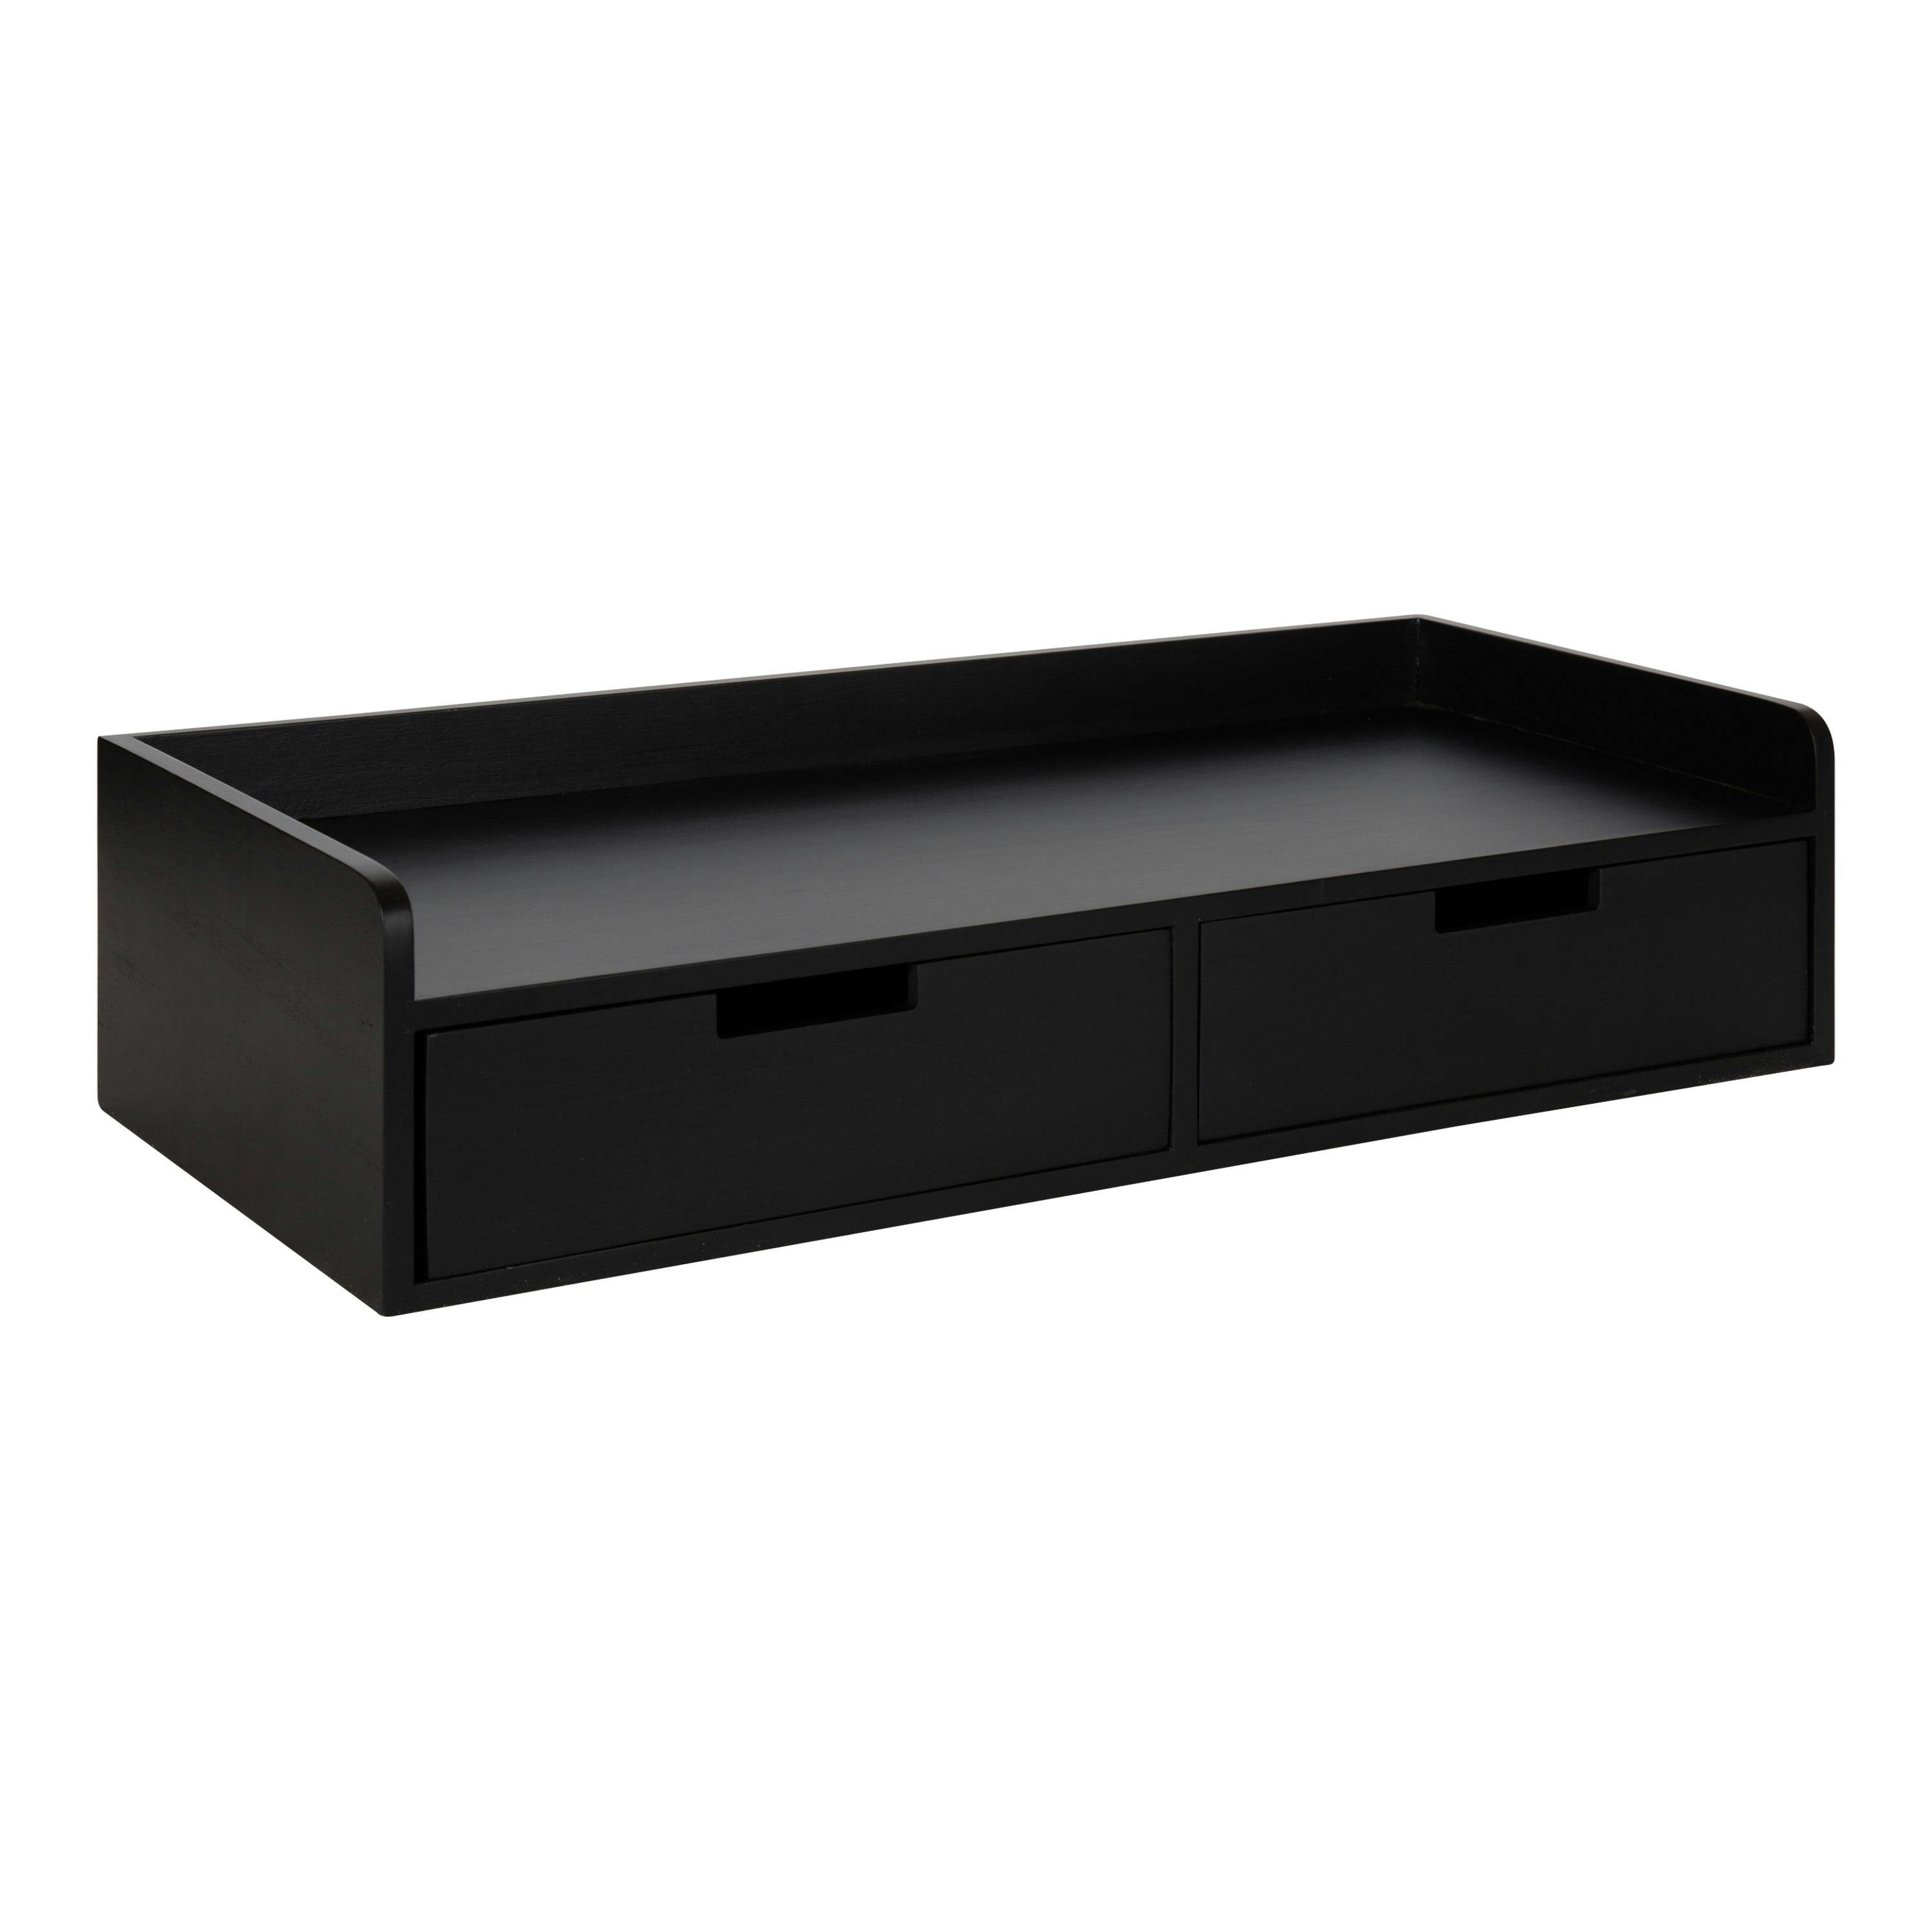 Sleek Black Wood and Metal Floating Console Desk with Storage